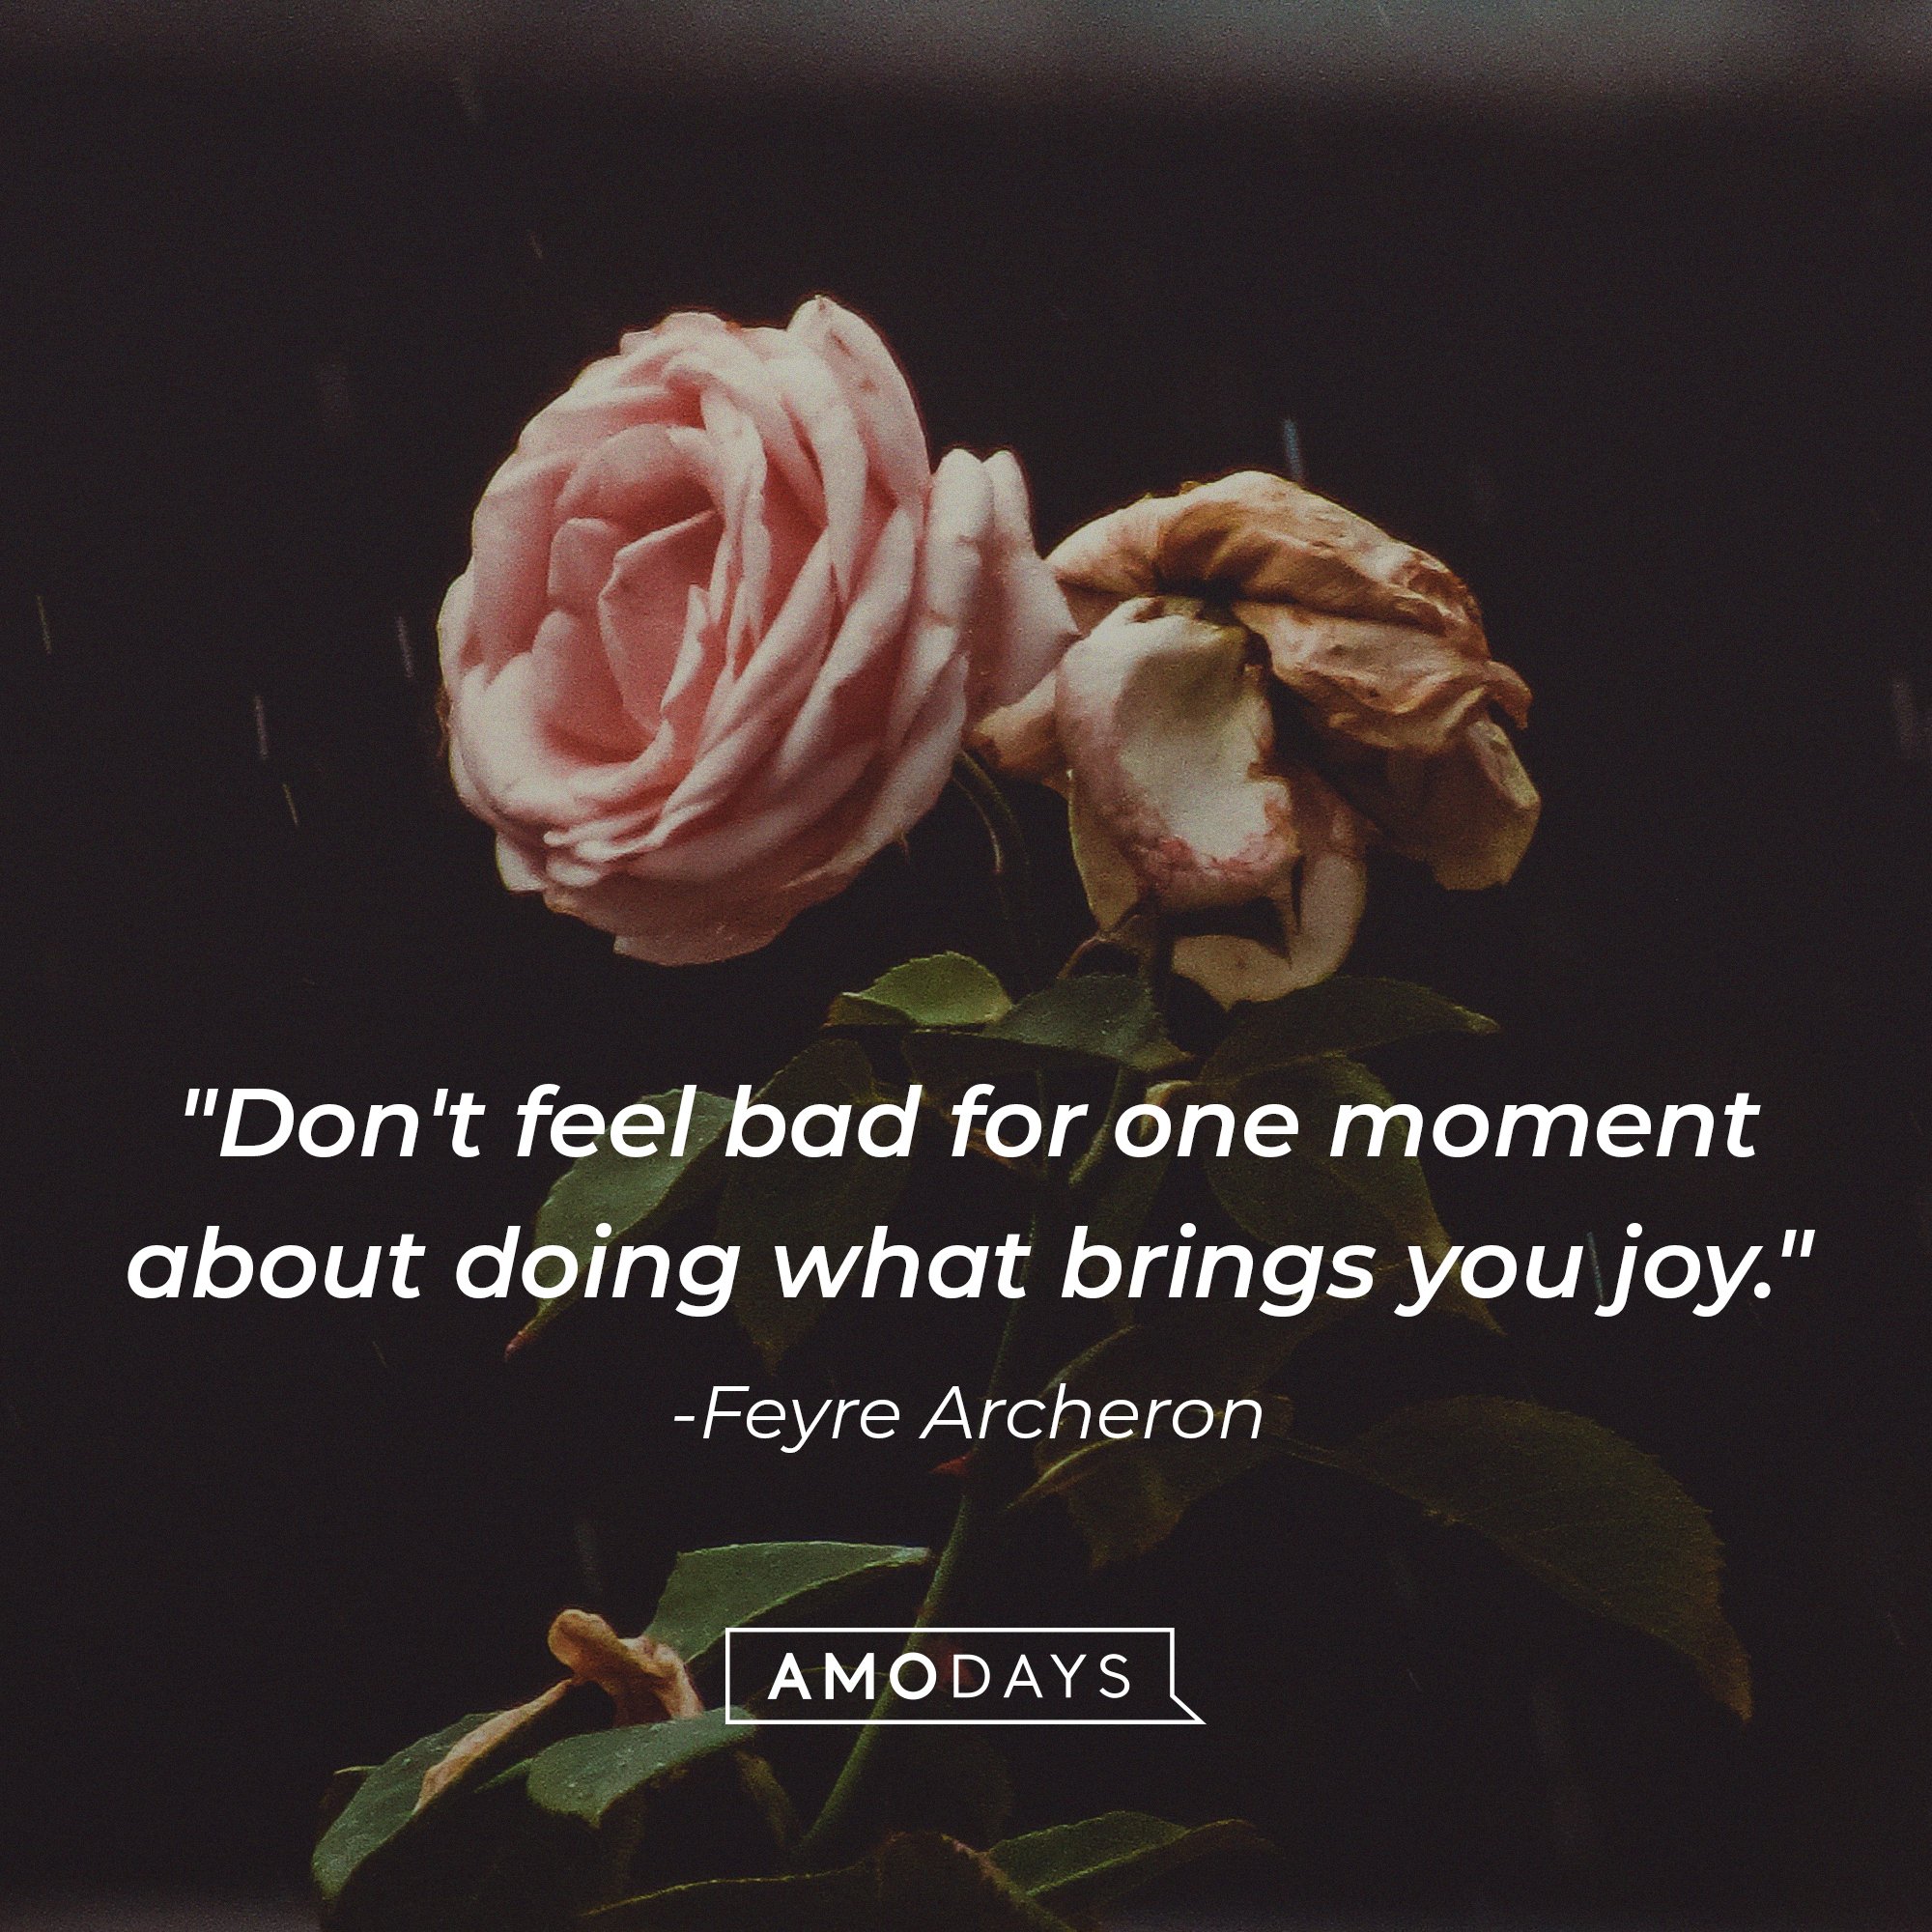  Feyre Archeron’s quote: "Don't feel bad for one moment about doing what brings you joy." | Image: AmoDays